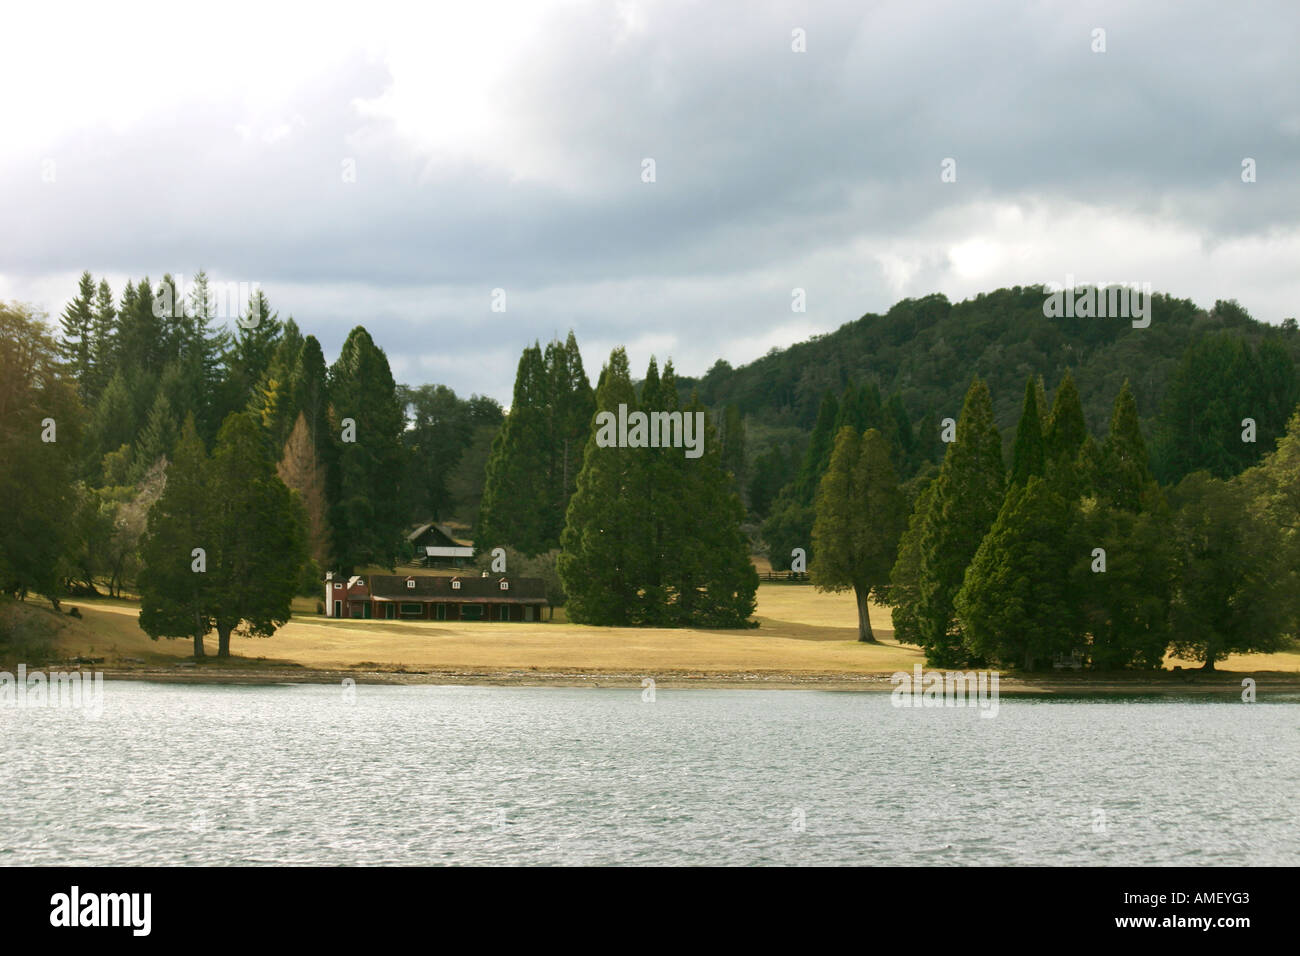 A view of an estancia house from lake Nahuel Huapi near Villa La Angostura Possible from a rich and famous person as this proper Stock Photo